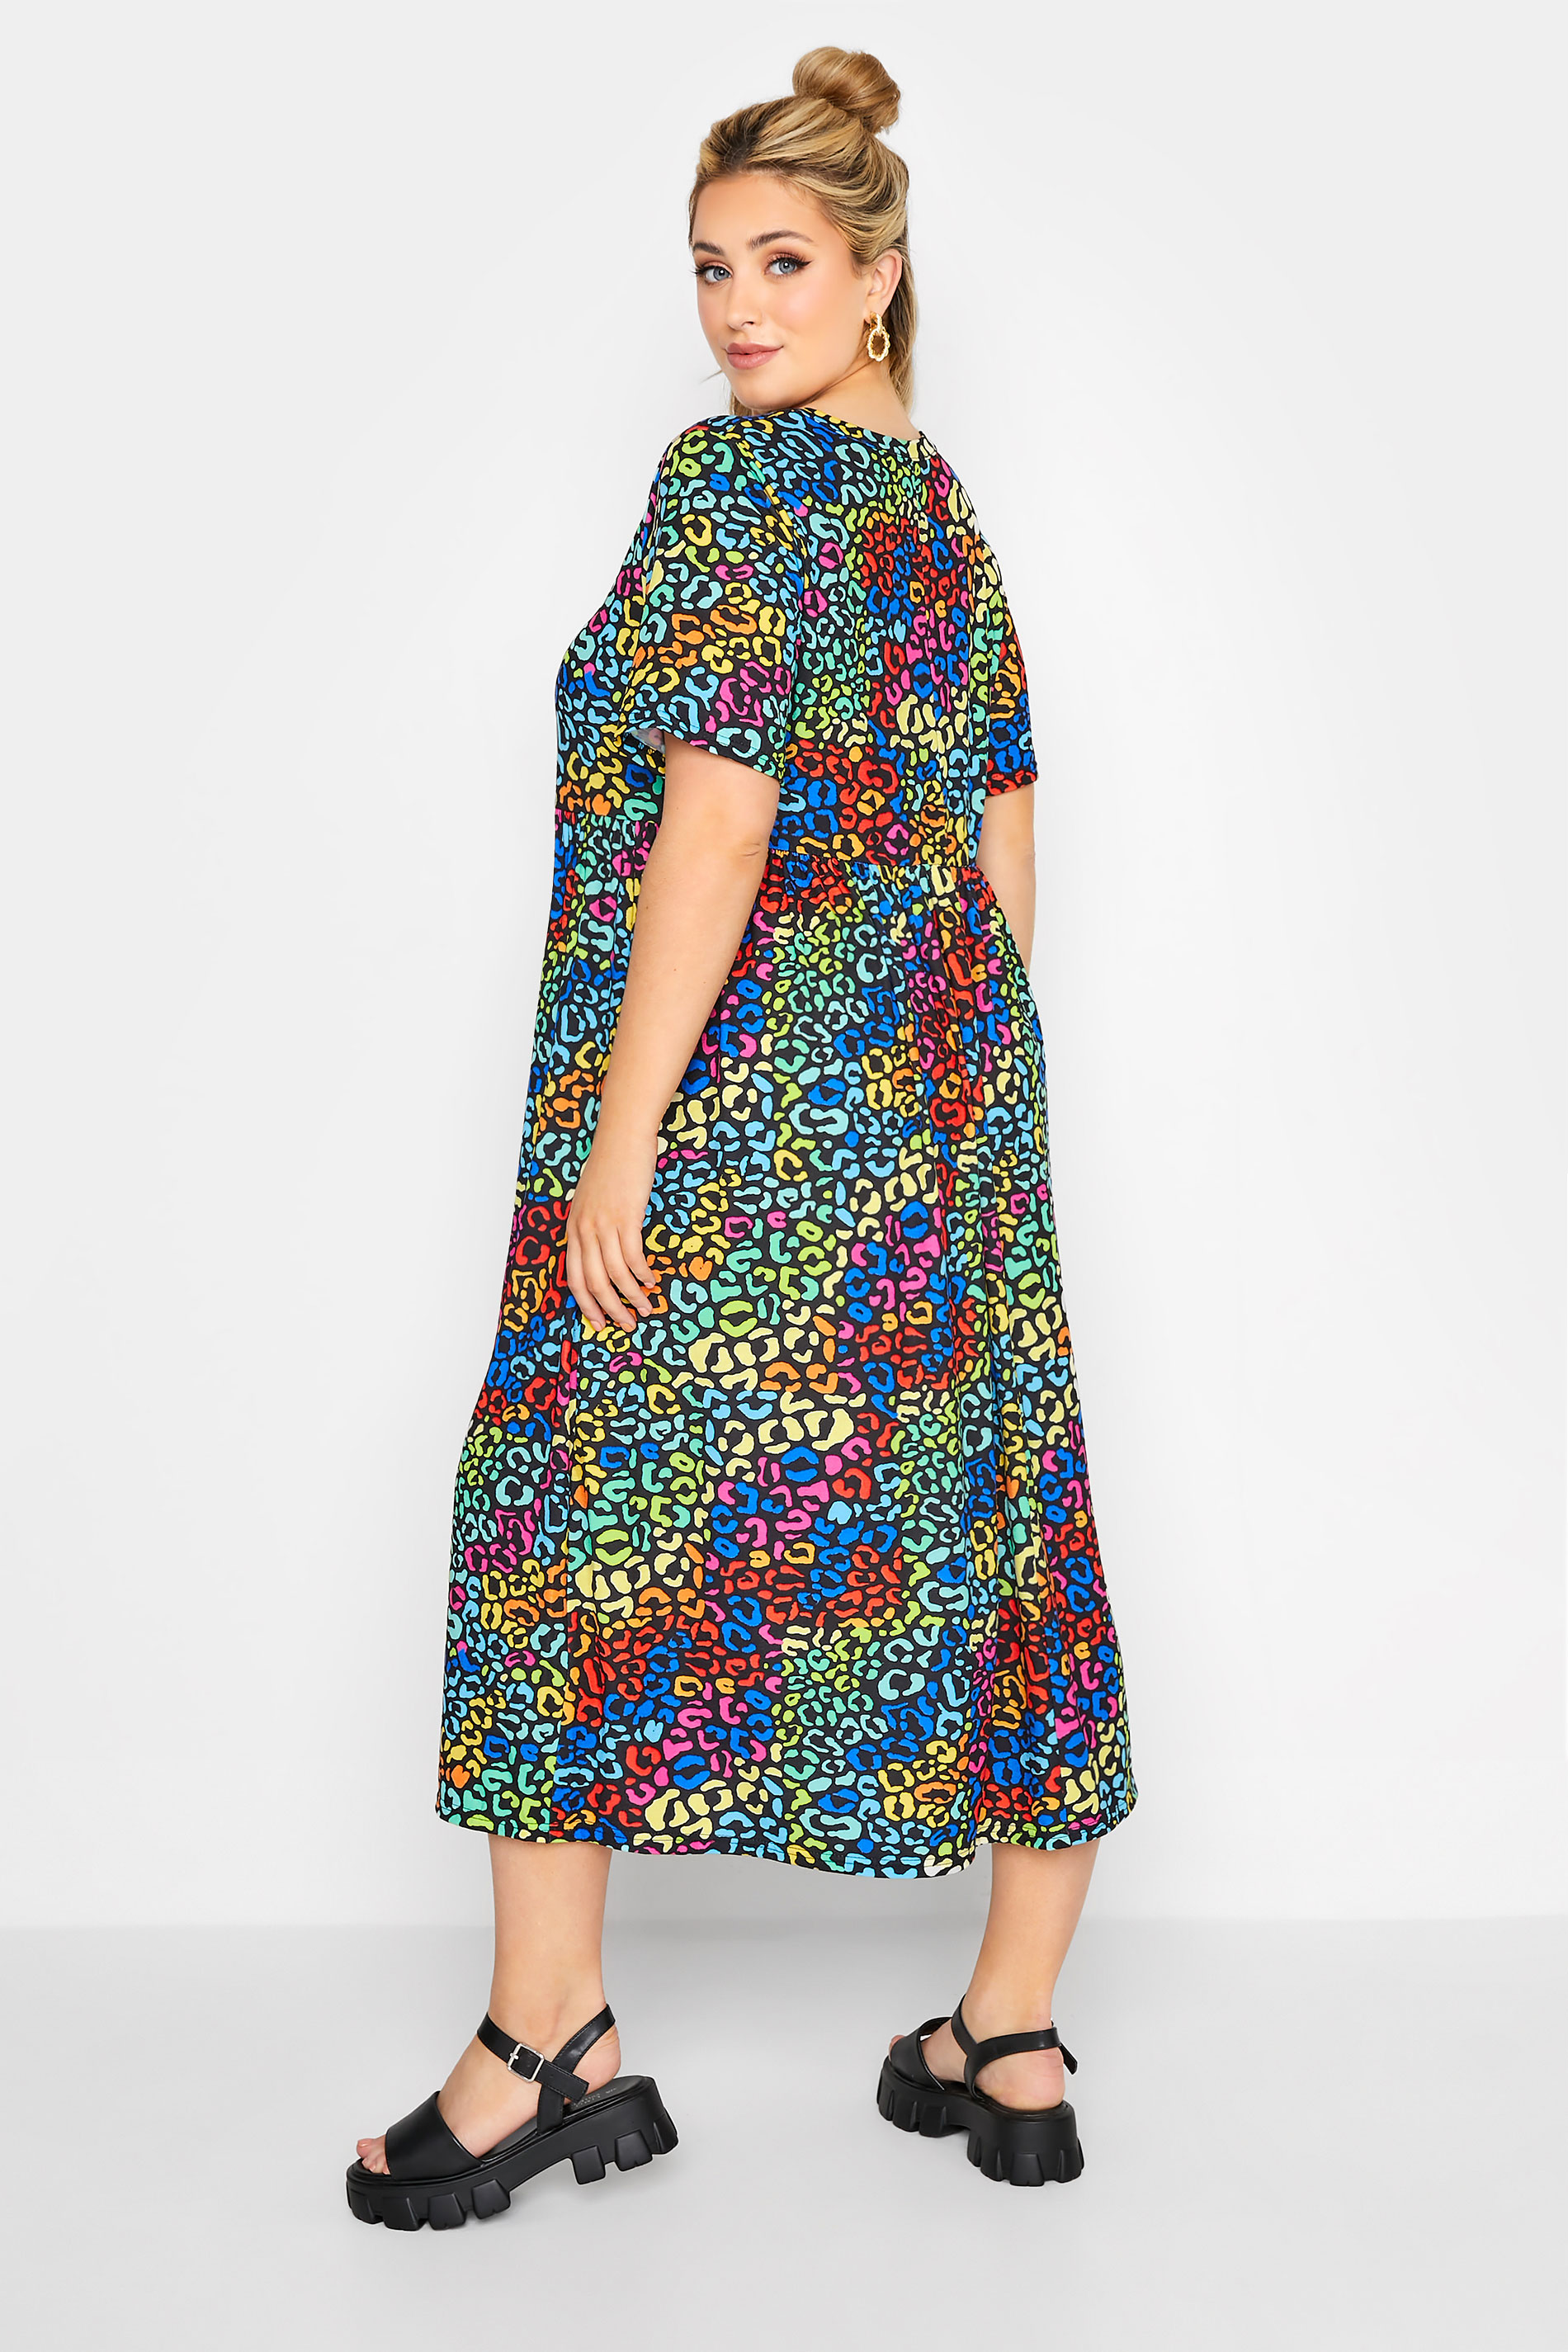 LIMITED COLLECTION Plus Size Black Rainbow Leopard Print Midaxi Dress | Yours Clothing 3